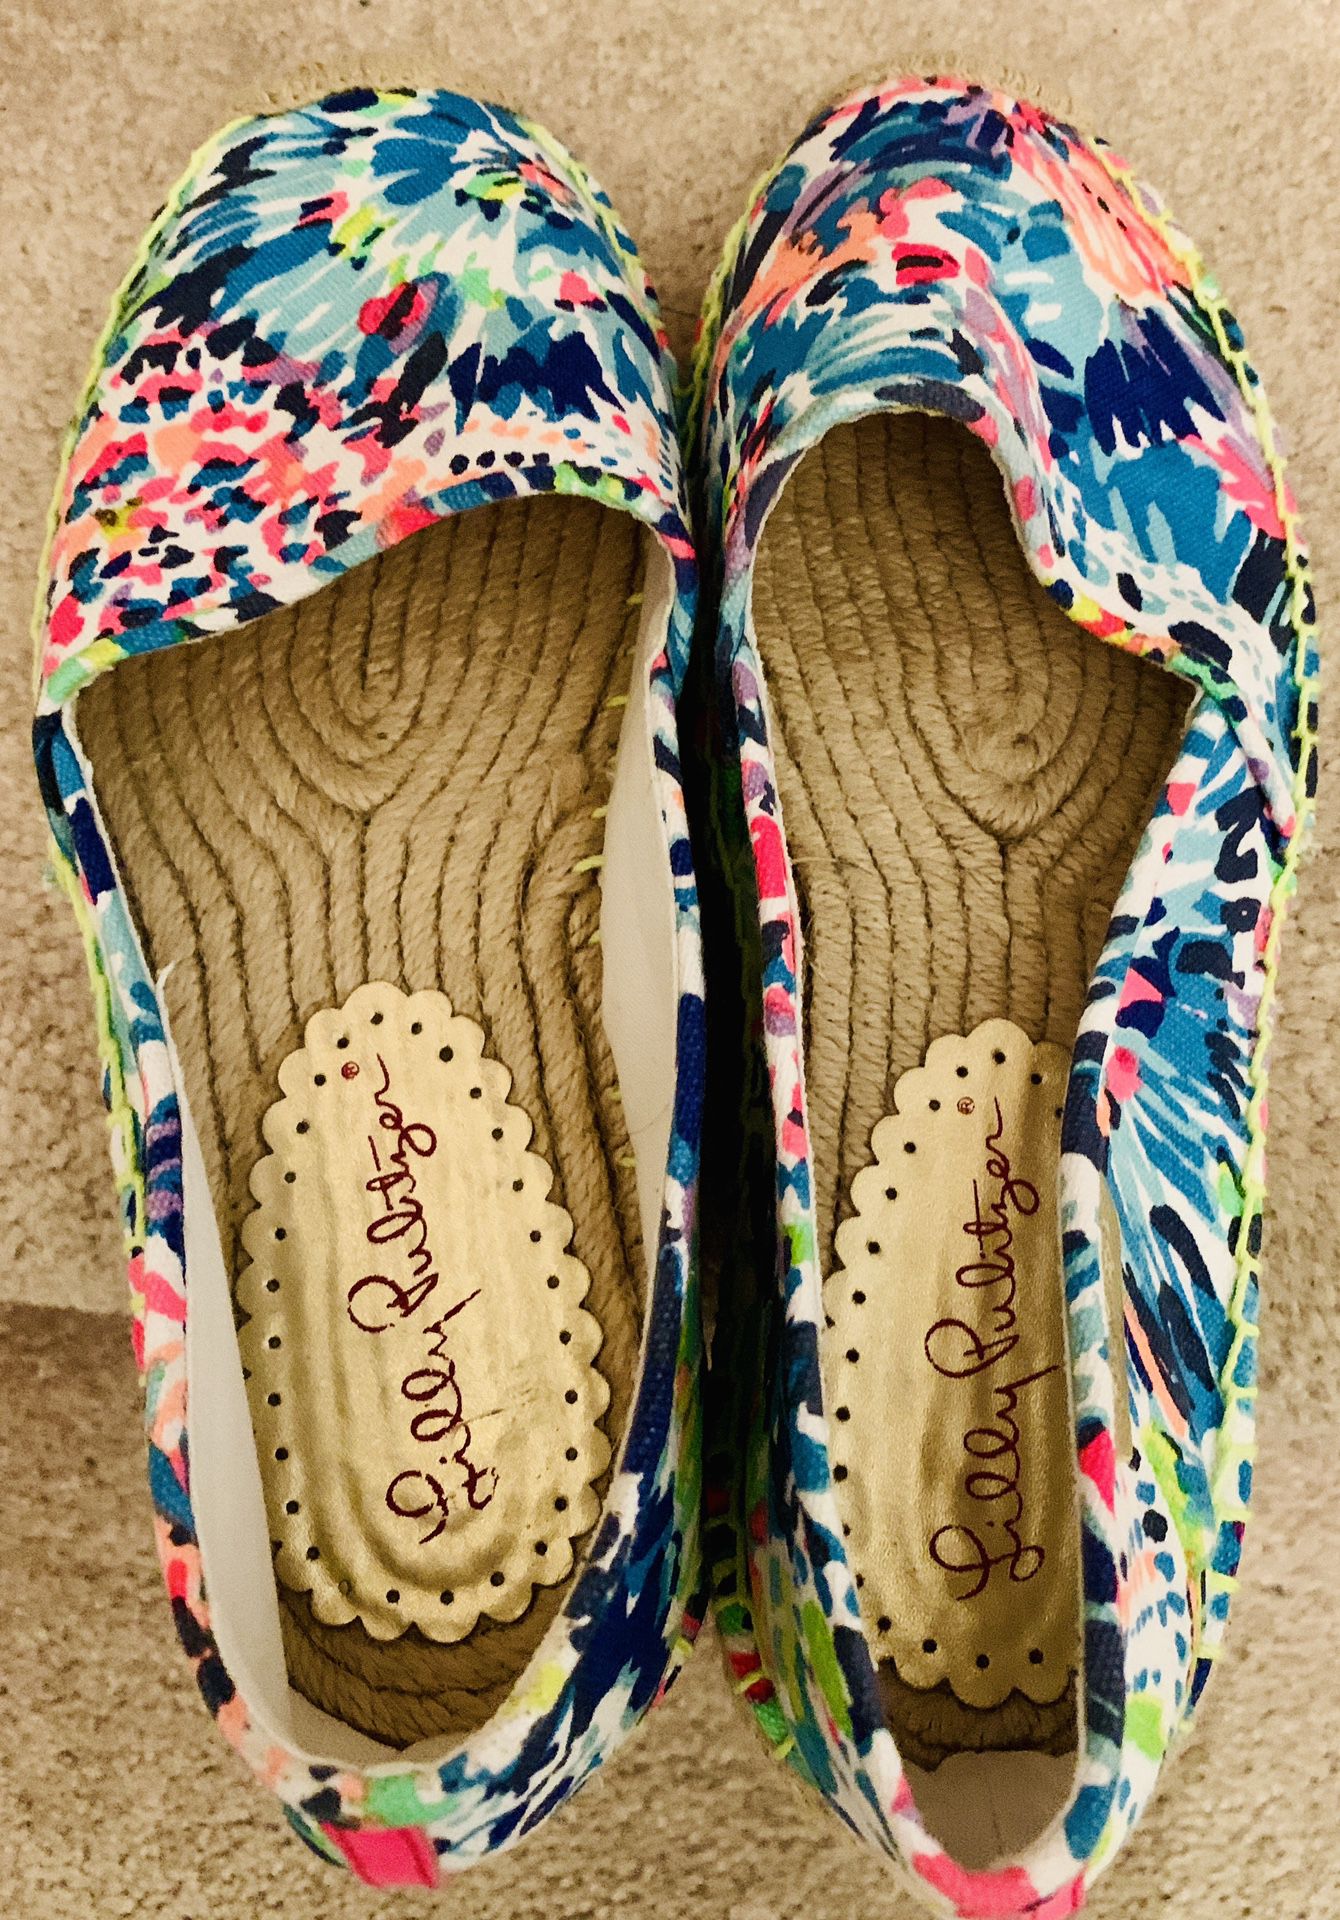 Lilly Pulitzer size 8 espadrilles $35